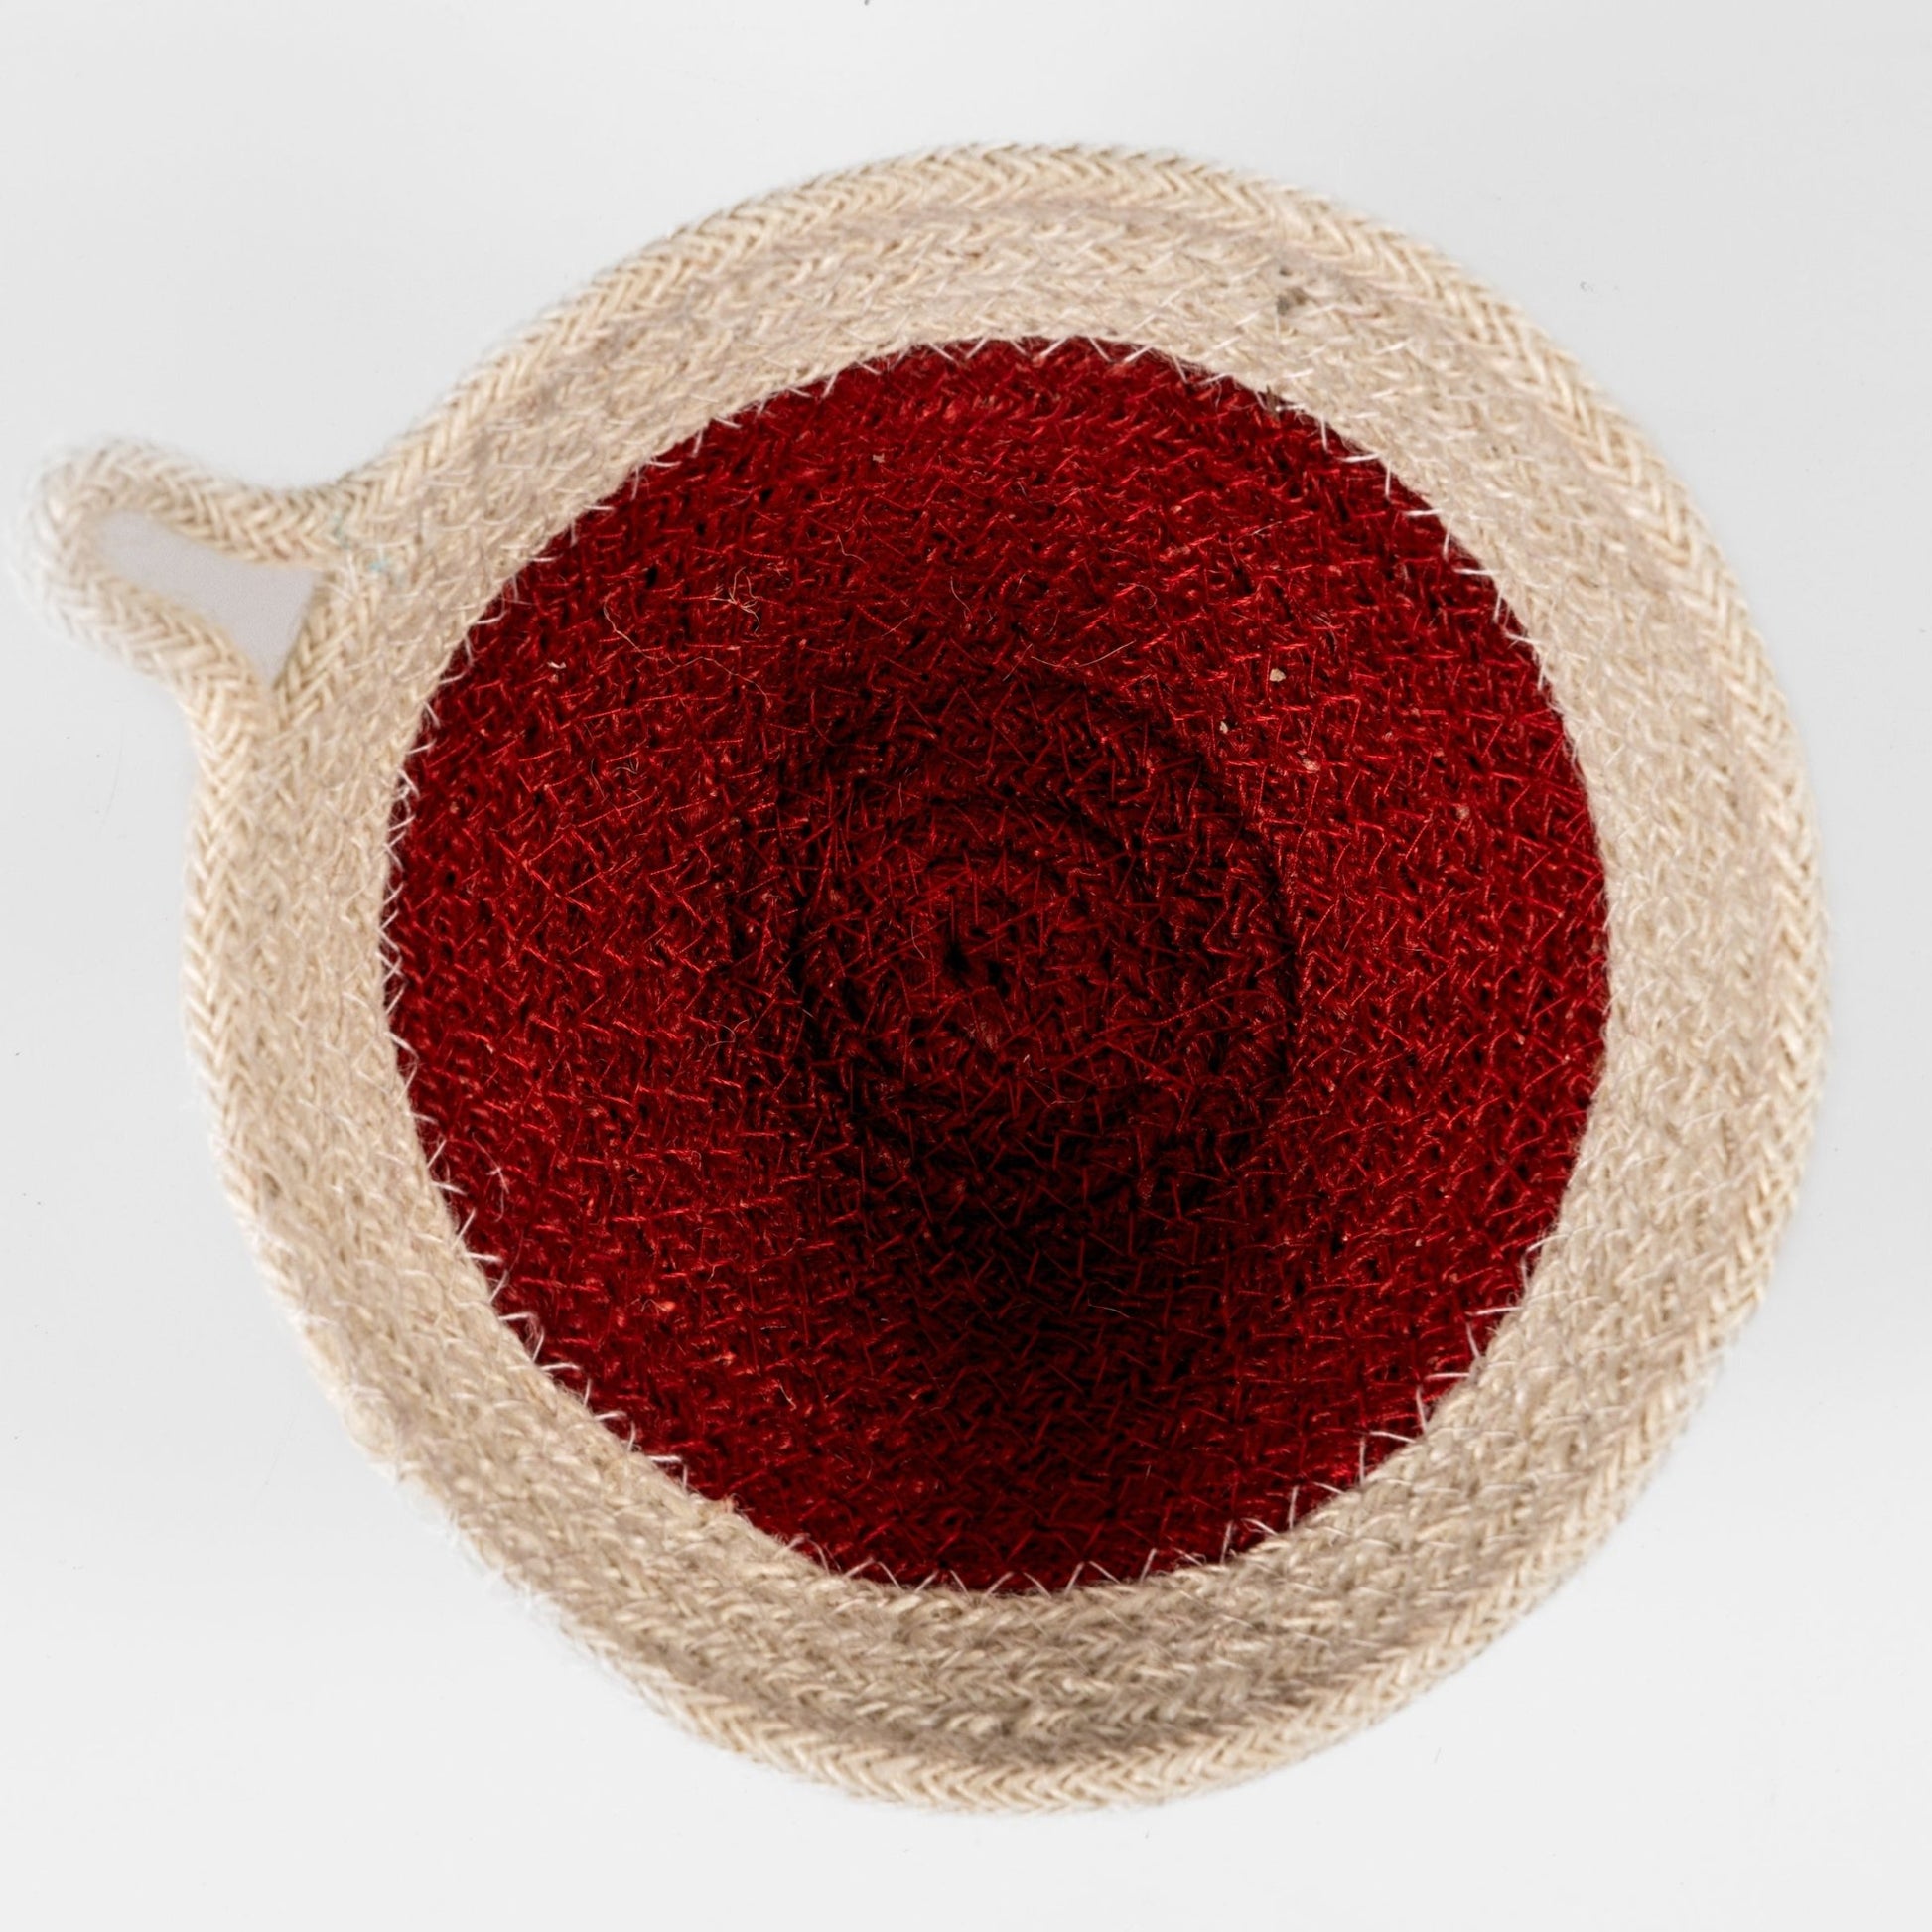 Top view of the jute Red and White Round Basket 